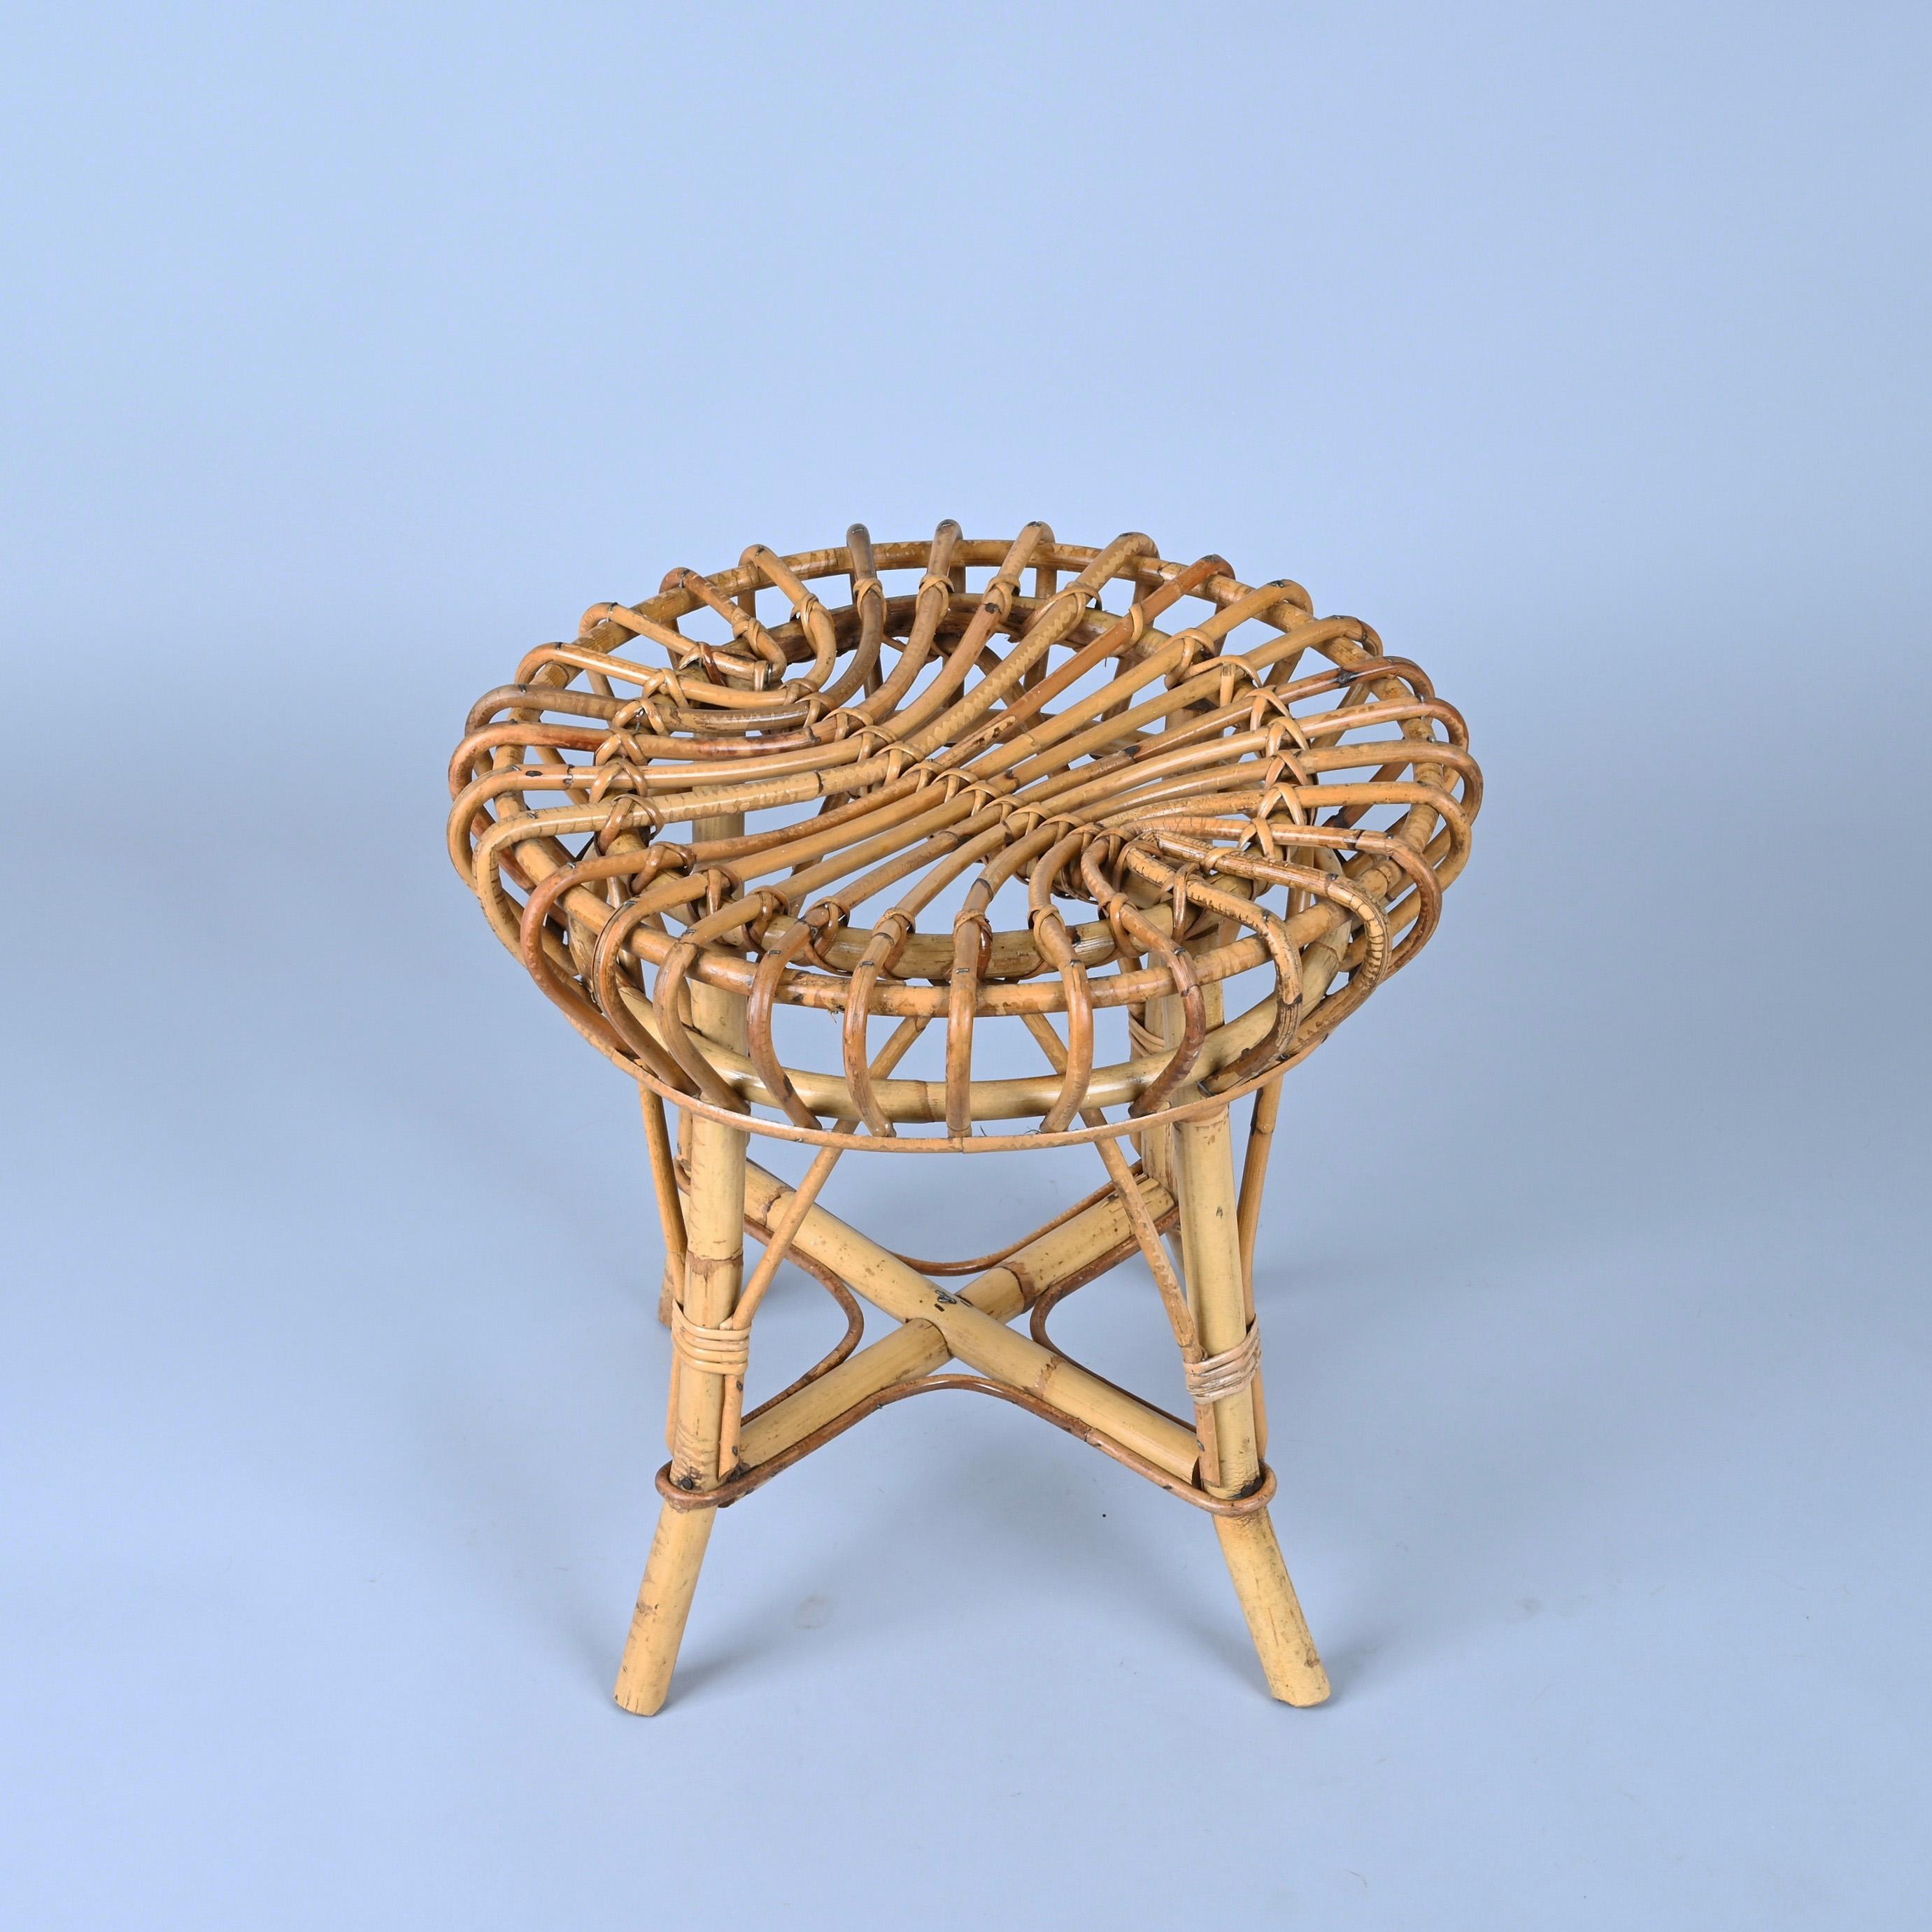 Midcentury round bamboo and wicker ottoman stool. This pouf was designed by Franco Albini in Italy during the 1960s.

This piece is fantastic as the rattan is shaped in a unique way, biggest canes composing the structure while the top part is made